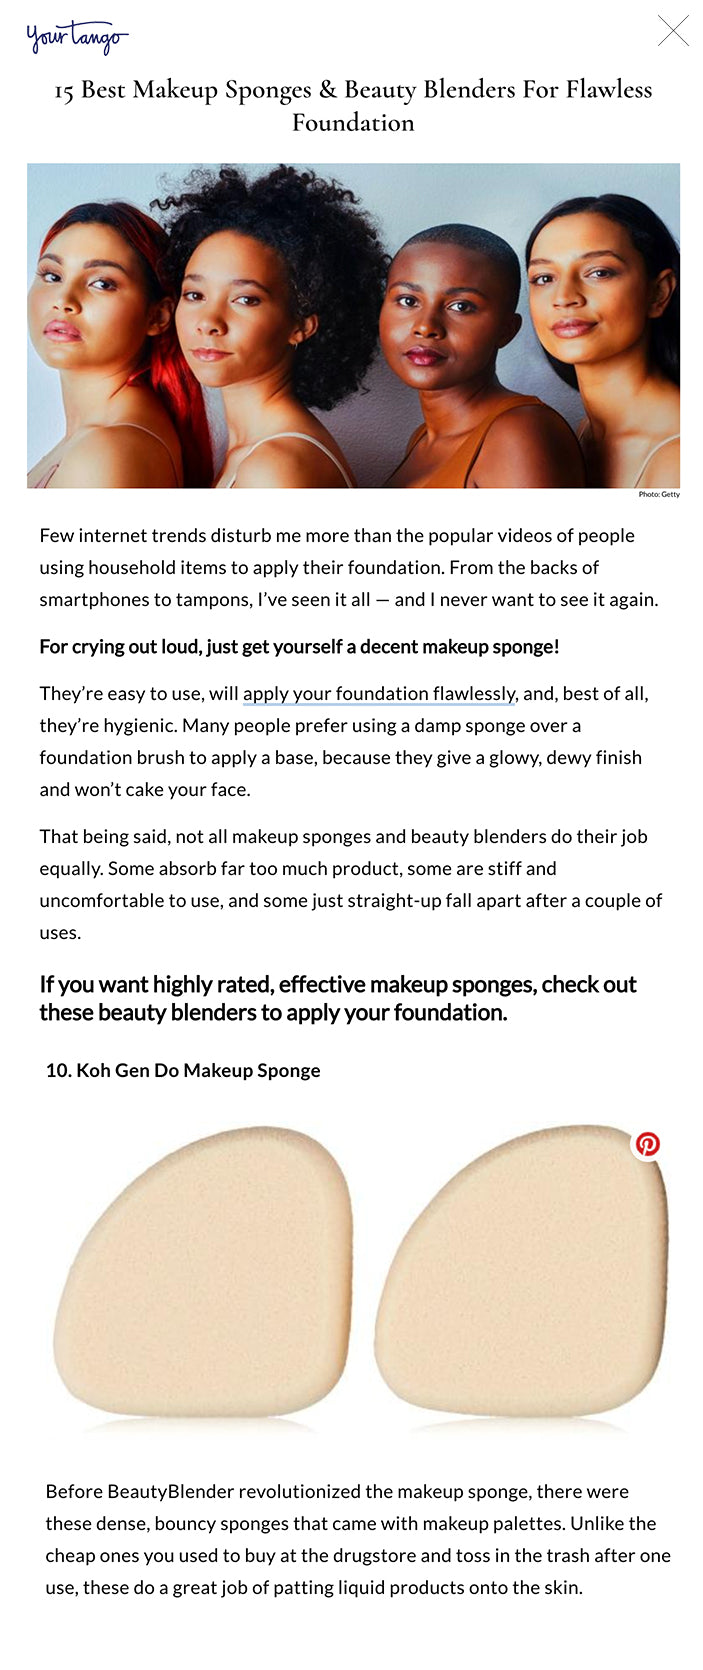 15 Best Makeup Sponges & Beauty Blenders For Flawless Foundation Photo: Getty15 Best Makeup Sponges & Beauty Blenders For Flawless Foundation Alice Kelly Writer Self Aug 3, 2020, 09:30 EDT  Few internet trends disturb me more than the popular videos of people using household items to apply their foundation. From the backs of smartphones to tampons, I’ve seen it all — and I never want to see it again.  For crying out loud, just get yourself a decent makeup sponge!  They’re easy to use, will apply your foundation flawlessly, and, best of all, they’re hygienic. Many people prefer using a damp sponge over a foundation brush to apply a base, because they give a glowy, dewy finish and won’t cake your face.   That being said, not all makeup sponges and beauty blenders do their job equally. Some absorb far too much product, some are stiff and uncomfortable to use, and some just straight-up fall apart after a couple of uses.   If you want highly rated, effective makeup sponges, check out these beauty blenders to apply your foundation. RELATED: 15 Best Skincare Fridges For Preserving Your Beauty Products  1. The Original BeautyBlender  best makeup sponges  This sponge is the mother of all makeup sponges and single-handedly has every makeup brand striving to replicate its design. It’s wide base and pointed tip is perfect for covering large cheek areas and tighter corners, like under eyes.   (Sephora, $20)  2. e.l.f. Total Face Sponge  best makeup sponges  For applying powder, you need a sponge that will evenly distribute the product on your face. This flat-edged sponge won’t cake your powder or leave you with uneven makeup.  (Target, $5)  3. Hourglass Ambient Strobe Light Sculptor  best makeup sponges  Highlighter-obsessed makeup lovers need these sponge that's specifically designed to get the most out of your shimmery powders. It's dense in texture so you won’t waste powder, and its unique shape fits perfectly along the high point of your face for easy application.   (Sephora, $22)  4. Real Techniques Miracle Complexion Sponge  best makeup sponges  My personal favorite sponge has to be this Real Techniques one. I’ve bought cappuccinos more expensive than these sponges and have happily repurchased these several times over the last couple of years.     (Walmart, $4.88)  RELATED: 13 Best Setting Powders To Keep Your Makeup In Place All Day  5. Milk Makeup Dab + Blend Applicator  best makeup sponges  This gel applicator is much easier to wash than typical sponges. All you have to do is wipe any remaining product off and it’s ready to reuse.   (Check prices and reviews on Amazon)  6. Tarte Foundcealer Multi-Tasking Sponge  best makeup sponges  This vegan sponge is super-soft and ideal for building coverage. If you prefer a natural, lightweight foundation, opt for this sponge to give you a barely-there feel.   (Sephora, $16)  7. MakeupDrop Original Silicone Beauty Applicator  best makeup sponges  Non-porous applicators mean you get every last drop of your foundation on to your face. Less waste means more money in your pocket. A little goes a long way on this sponge, so make sure to use less foundation than you normally would.    (Check prices and reviews on Amazon)  8. Fenty Beauty Precision Makeup Sponge  best makeup sponges  Fans of Rihanna won’t be surprised to know that the Princess of Pop and Queen of makeup has made a makeup sponge to rival all other similar products. This 3-sided sponges will get every last nook of your face covered without creasing your makeup.    (Sephora, $16)  9. Jane Iredale Flocked Sponge  best makeup sponges  Unlike smooth sponges that hold powder all wrong, this textured sponges seamlessly speckles powder evenly on your face to give you a flawless coverage. You don’t even need to wet this sponge, which makes it perfect travel with for hourly touch-ups.   (Check prices and reviews on Amazon)  10. Koh Gen Do Makeup Sponge  best makeup sponges  Before BeautyBlender revolutionized the makeup sponge, there were these dense, bouncy sponges that came with makeup palettes. Unlike the cheap ones you used to buy at the drugstore and toss in the trash after one use, these do a great job of patting liquid products onto the skin.   (Check prices and reviews on Amazon)  RELATED: 21 Best Hydrating Makeup Primers For Dry Skin  11. M.A.C. All Blending Sponge  best makeup sponges  M.A.C. combines the depth of a traditional flat style sponge with the texture of thicker sponges, making it precise and durable. It’s great for patting in powders and smoothing around the contours of the face.   (Check prices and reviews on Amazon)  12. Sephora Collection Total Coverage Charcoal Sponge  best makeup sponges  Charcoal has amazing purifying qualities, so this sponge will keep you skin clean and free from blemishes with continuous use. The tapered angle shape is great for applying cream contours and highlighters.   (Sephora, $14)  13. Beaky 5-Piece Makeup Sponge Set  best makeup sponges  If you have sensitive skin or can’t be bothered to clean your sponge regularly, it helps to have replacement sponges on hand. This 5-piece set is affordable and latex-free, making them difficult to tear or damage.    (Check prices and reviews on Amazon)  14. Color Me Automatic Foundation Applicator Pro Edition  best makeup sponges  This is the closest thing to professional standard makeup application you can get without employing a makeup artist. Its pulsing technology taps your makeup into place, giving you a smooth finish. All you have to do is replace the sponges when necessary.    (Check prices and reviews on Amazon)  15. Sephora Detail Oriented Sponge  best makeup sponges  This unique-shaped sponge makes for precise makeup application and an even base. I especially like the pointed tip for blotting over smudged eyeliner and other makeup mishaps.  (Sephora, $6)  RELATED: 10 Black-Owned Beauty Brands That Promote Inclusivity — & The Best Foundation From Each